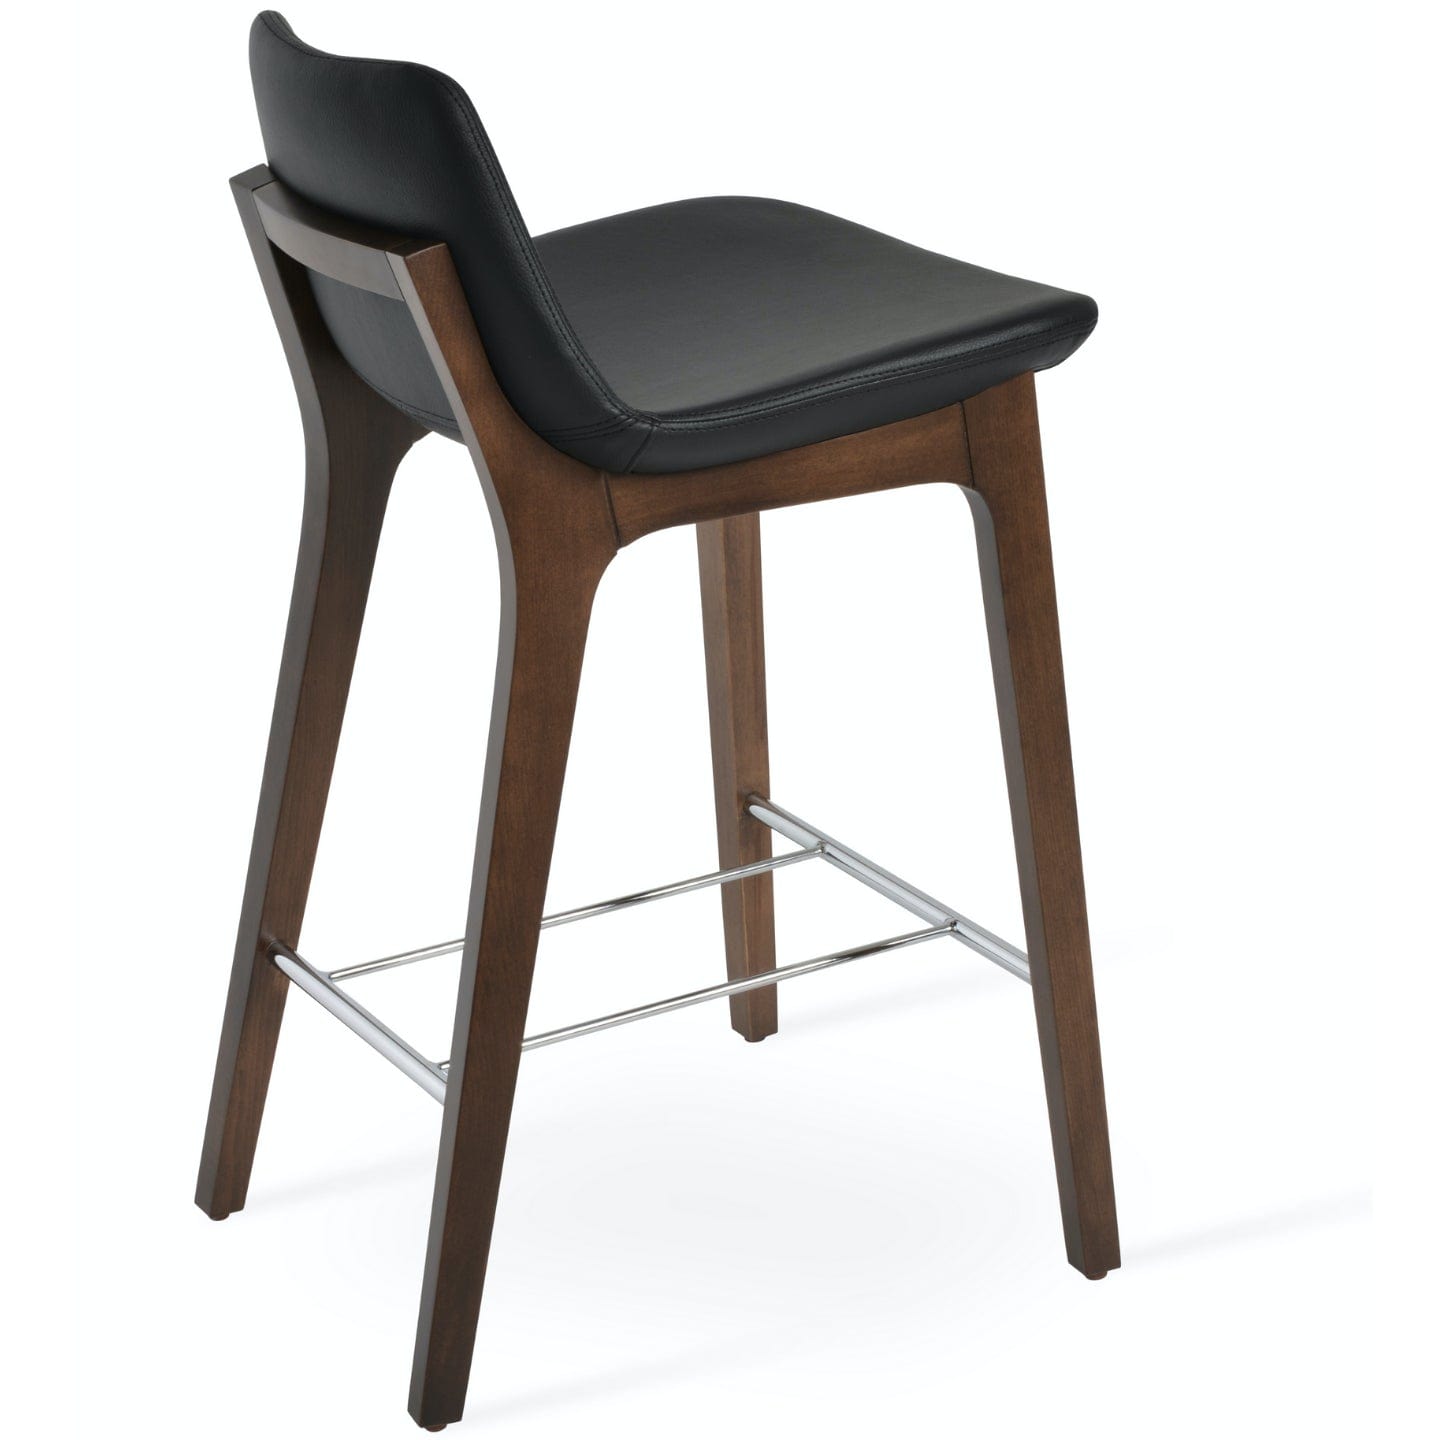 Soho Concept pera-wood-handle-back-wood-base-faux-leather-seat-kitchen-counter-stool-in-black